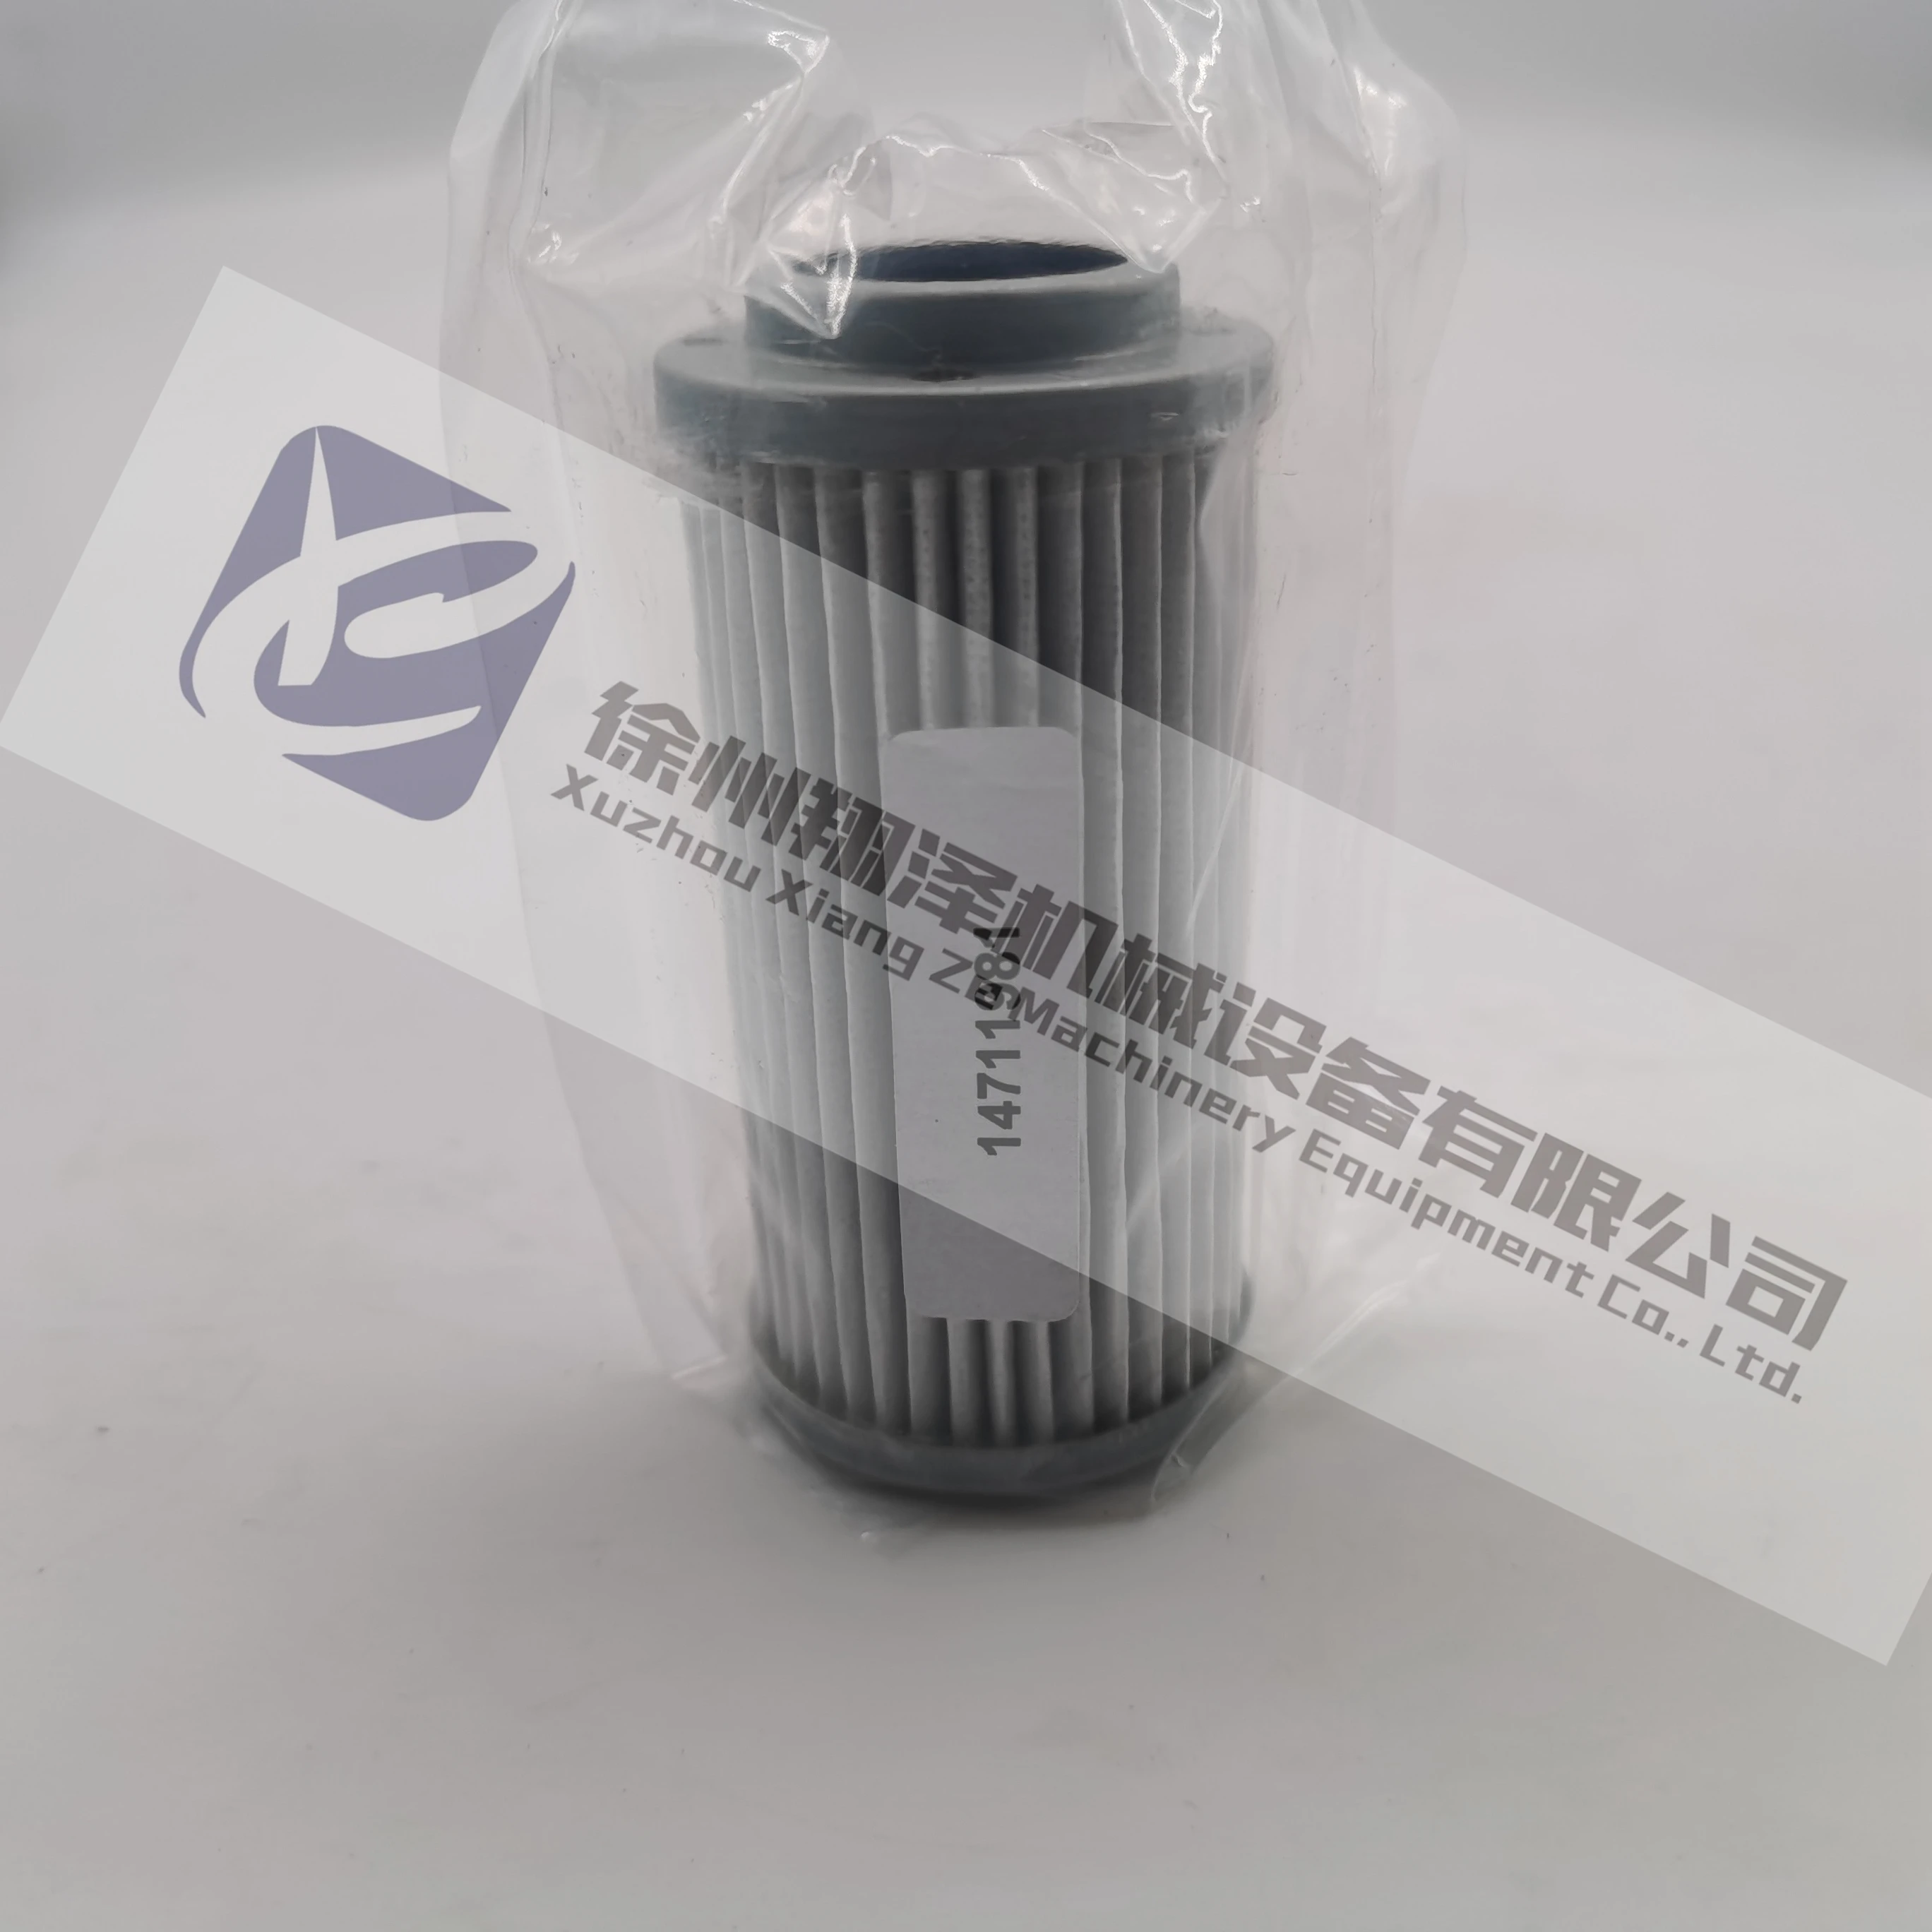 FOR VOLVO 14532686 14711981 HYDRAULIC OIL FILTER HOUSING ELEMENT FOR EXCAVATOR EC180C EC210C EC240C EC290C EC330C EC360C